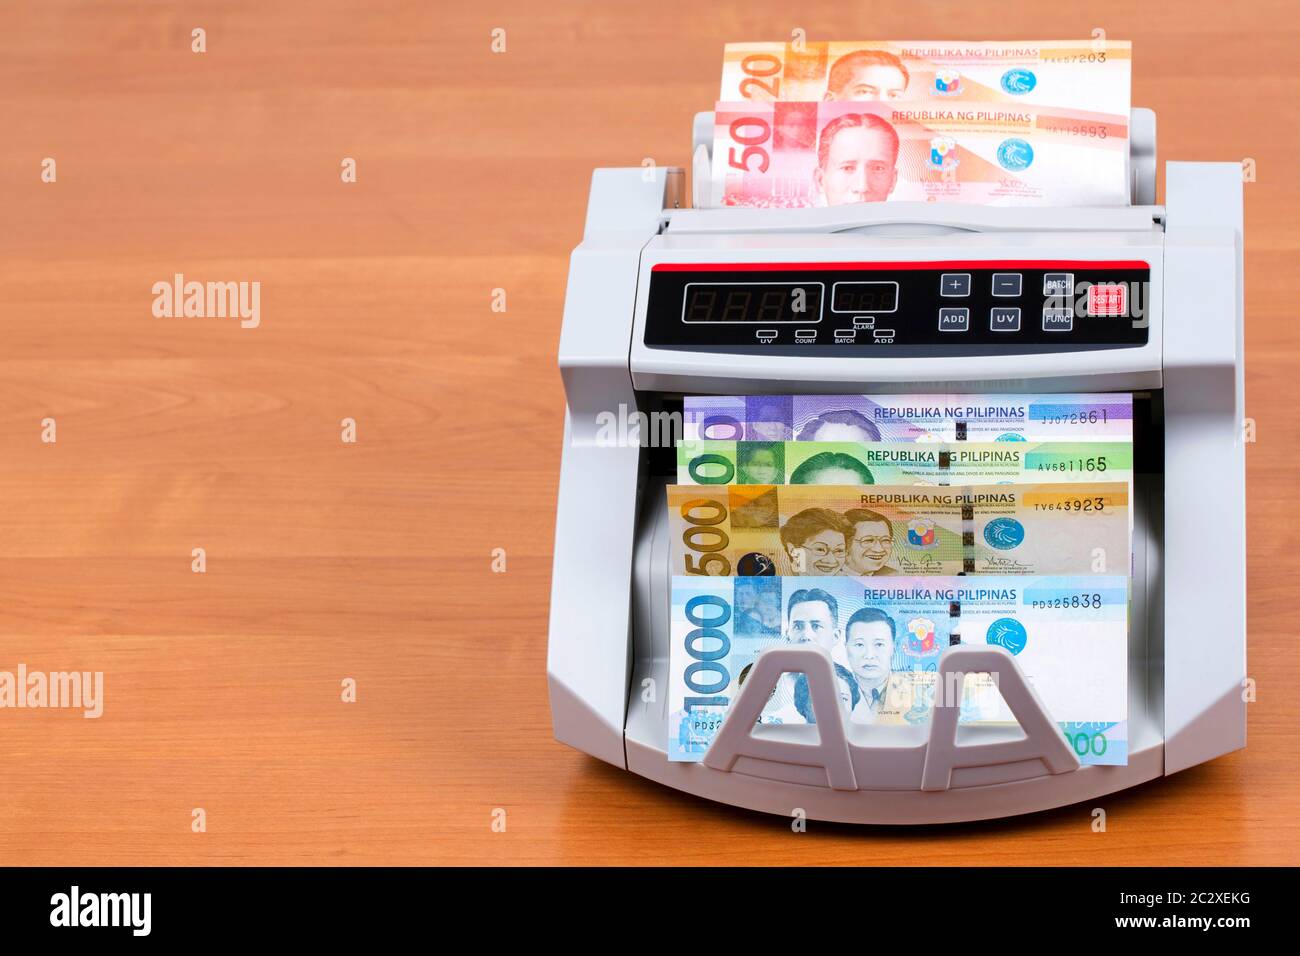 Money from the Philippines in a counting machine Stock Photo